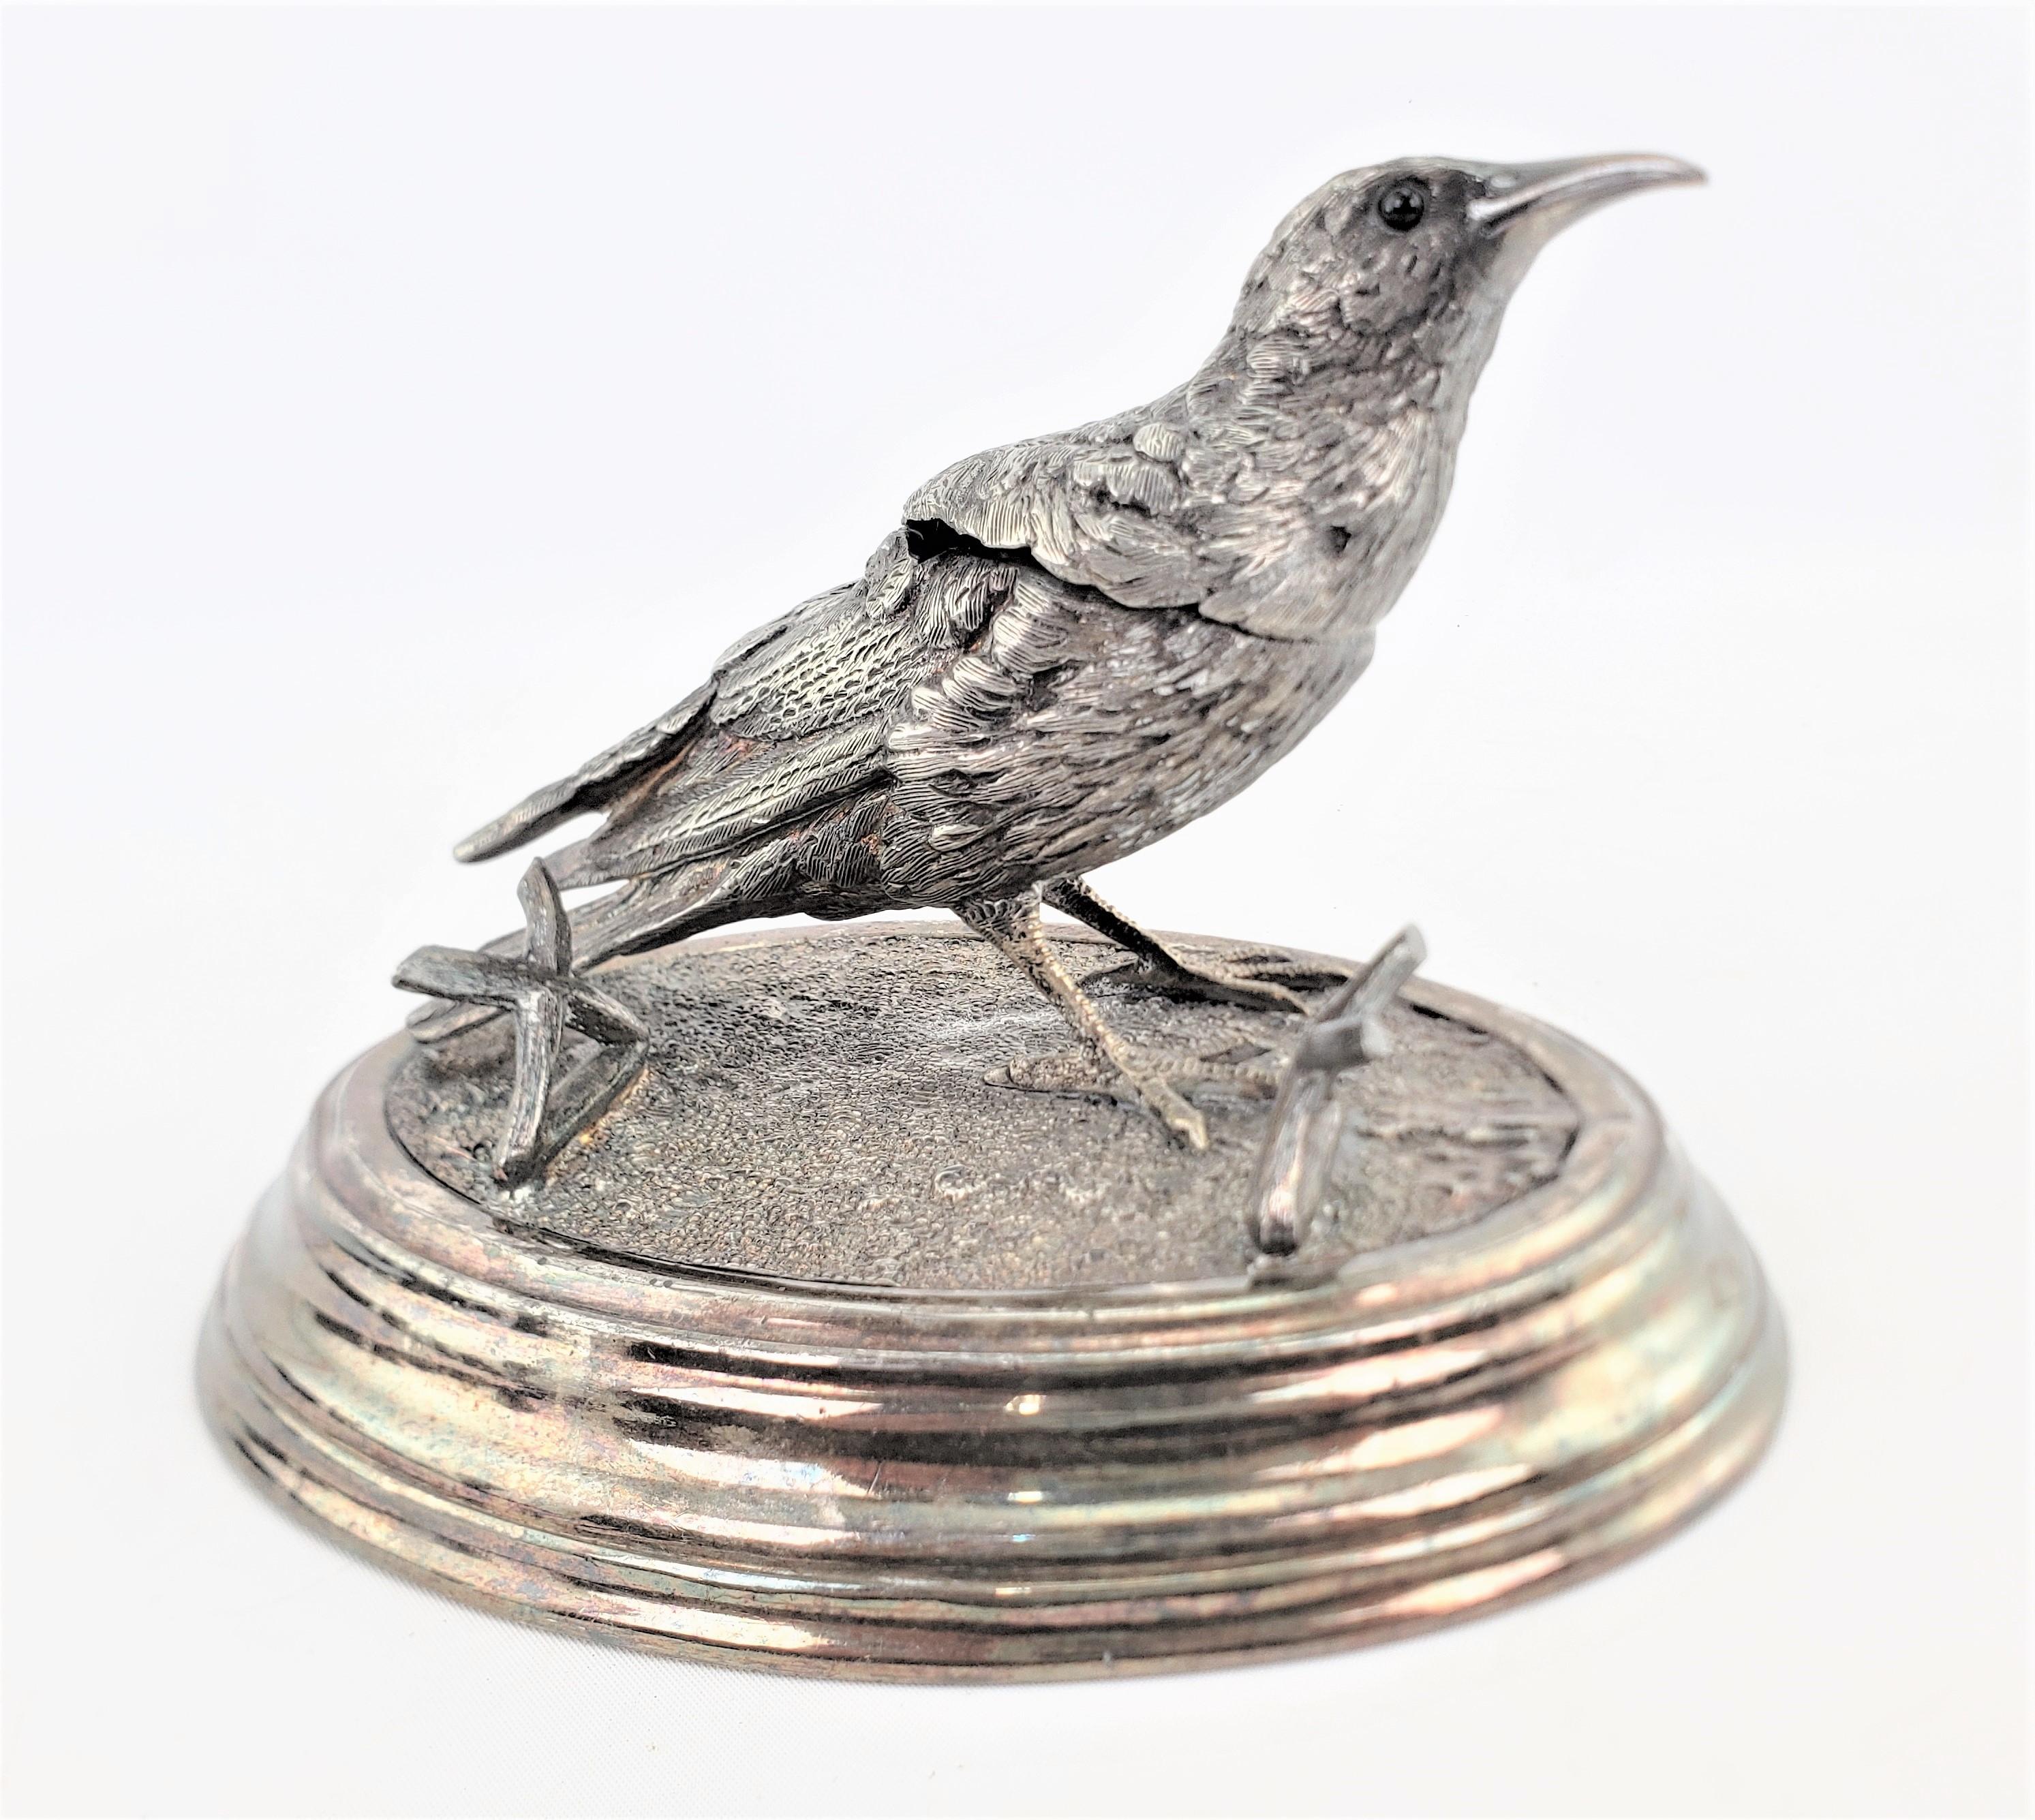 Victorian Antique Ornately Cast & Silver Plated Figural Bird Inkwell & Pen Holder or Rest